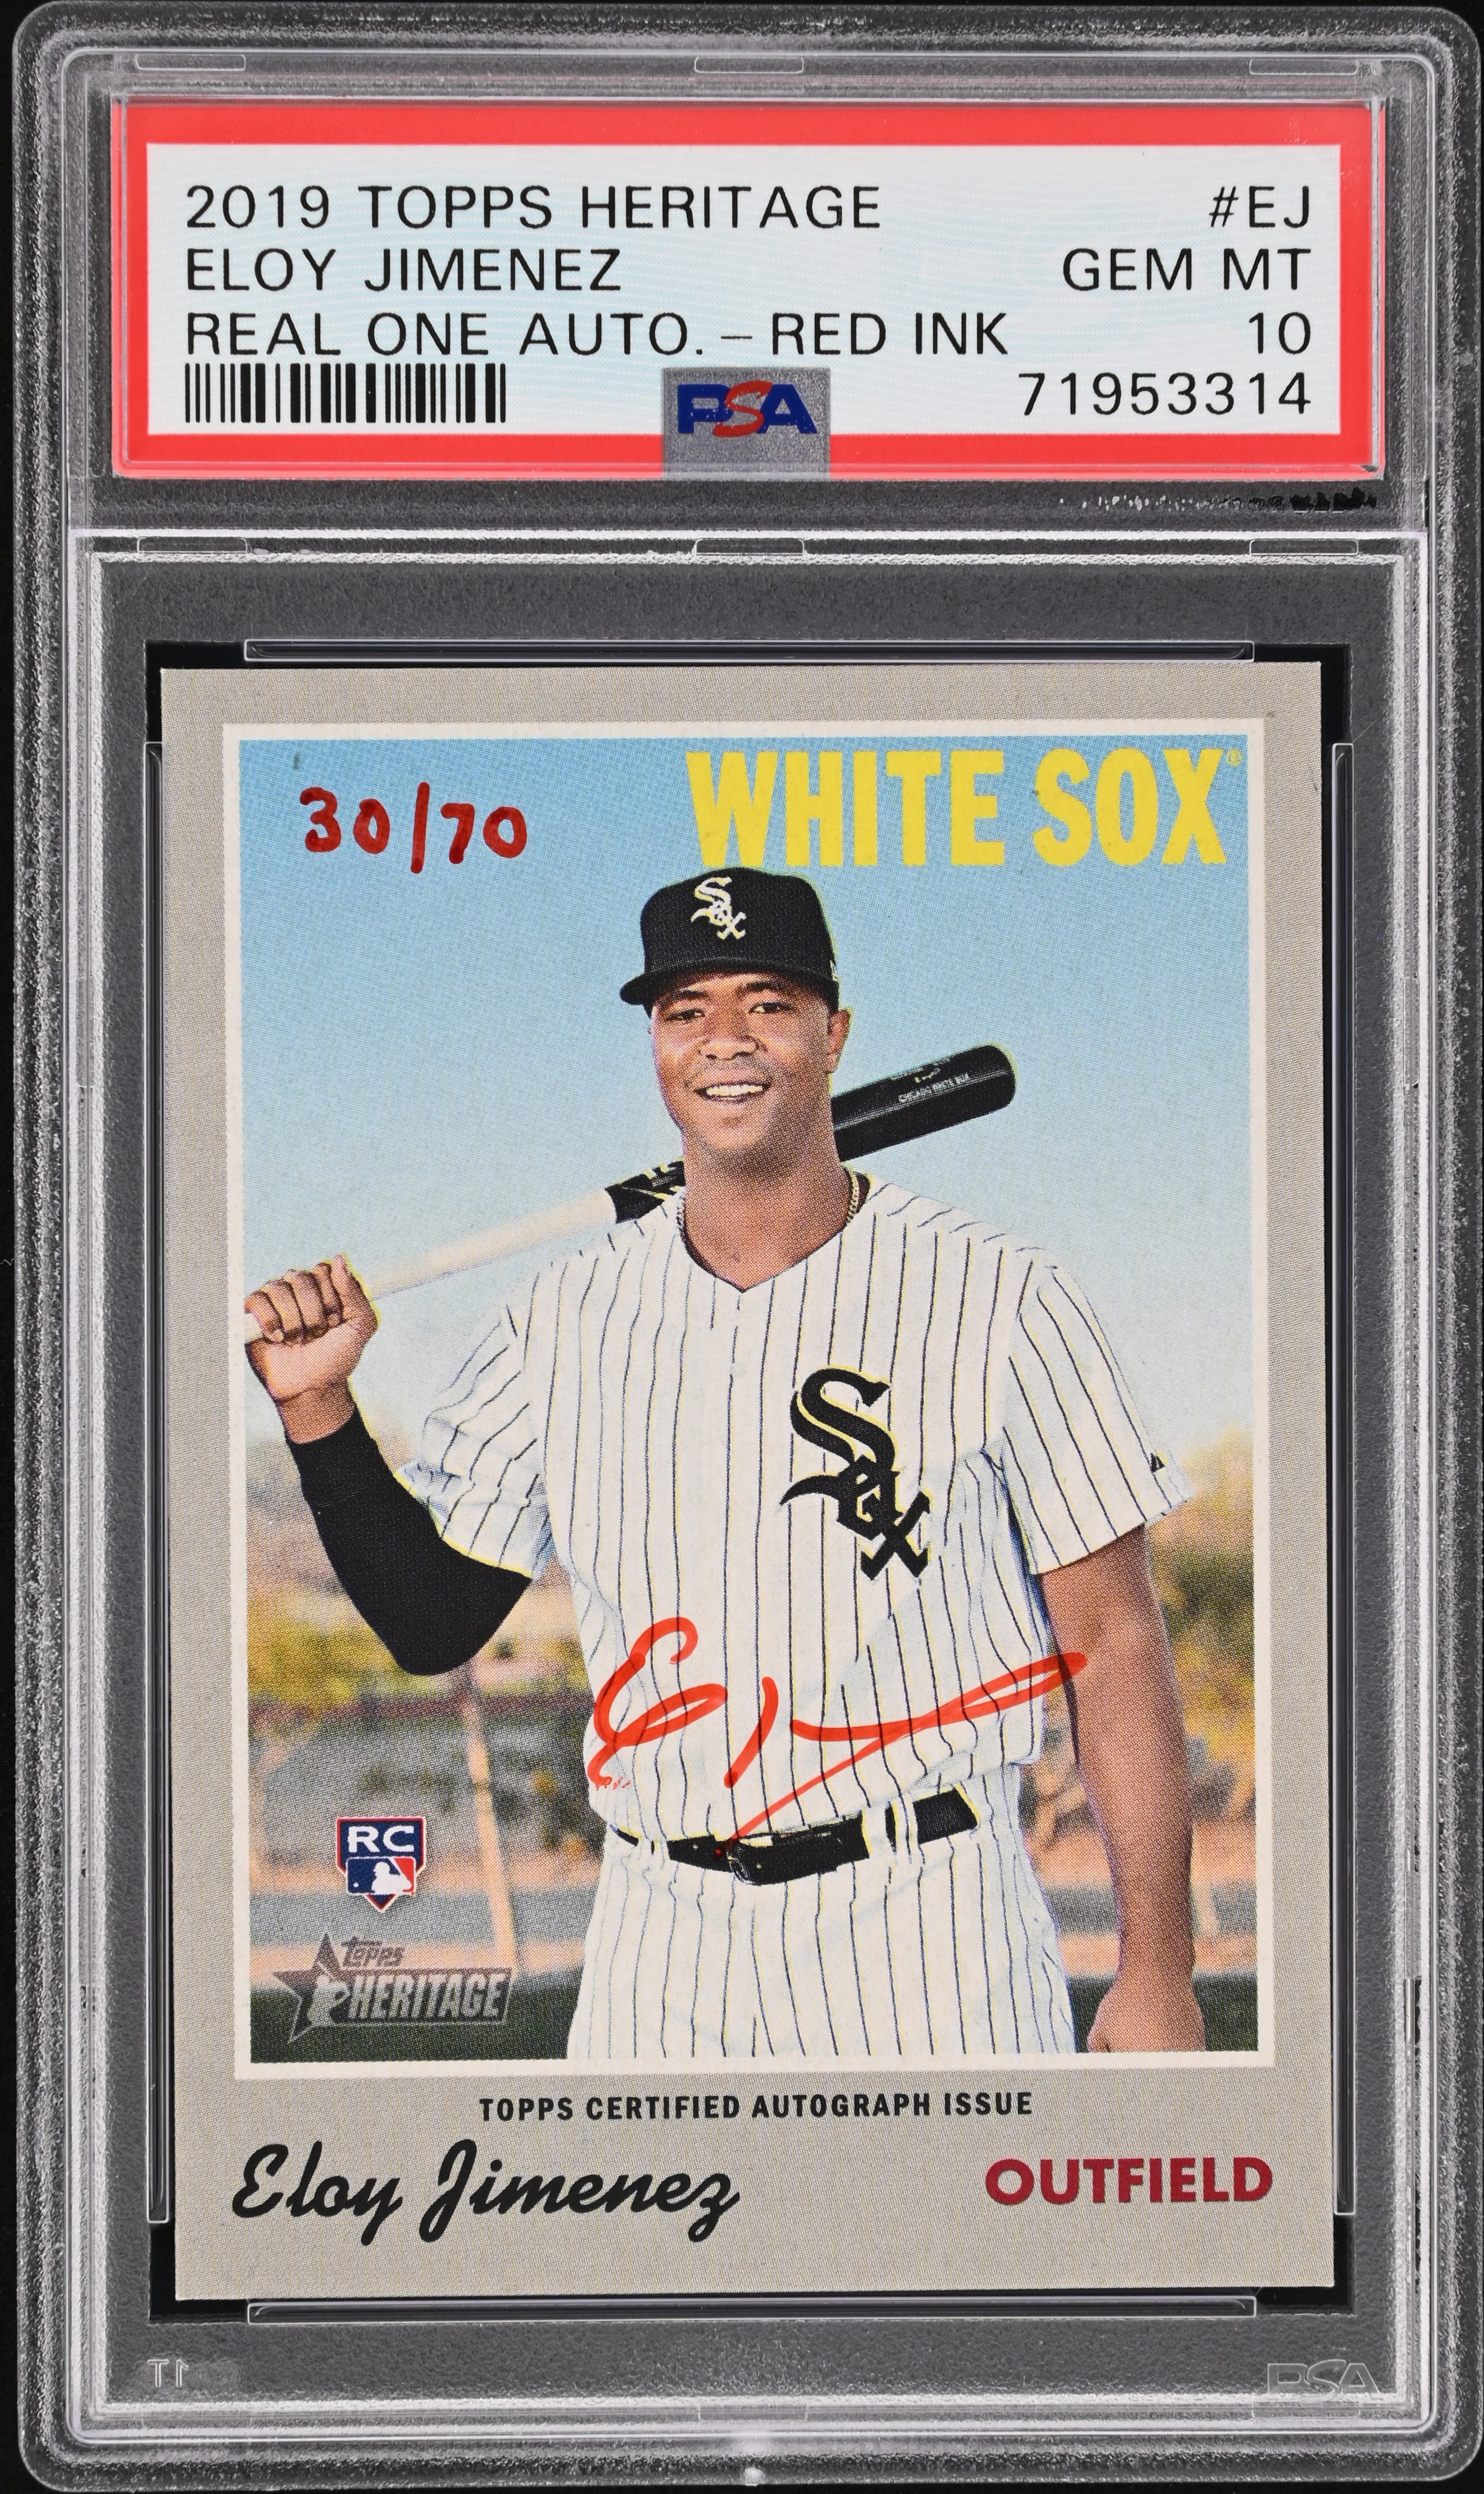 2019 Topps Heritage Real One Autographs Red Ink #ROA-EJ Eloy Jimenez Signed Rookie Card (#30/70)– PSA GEM MT 10